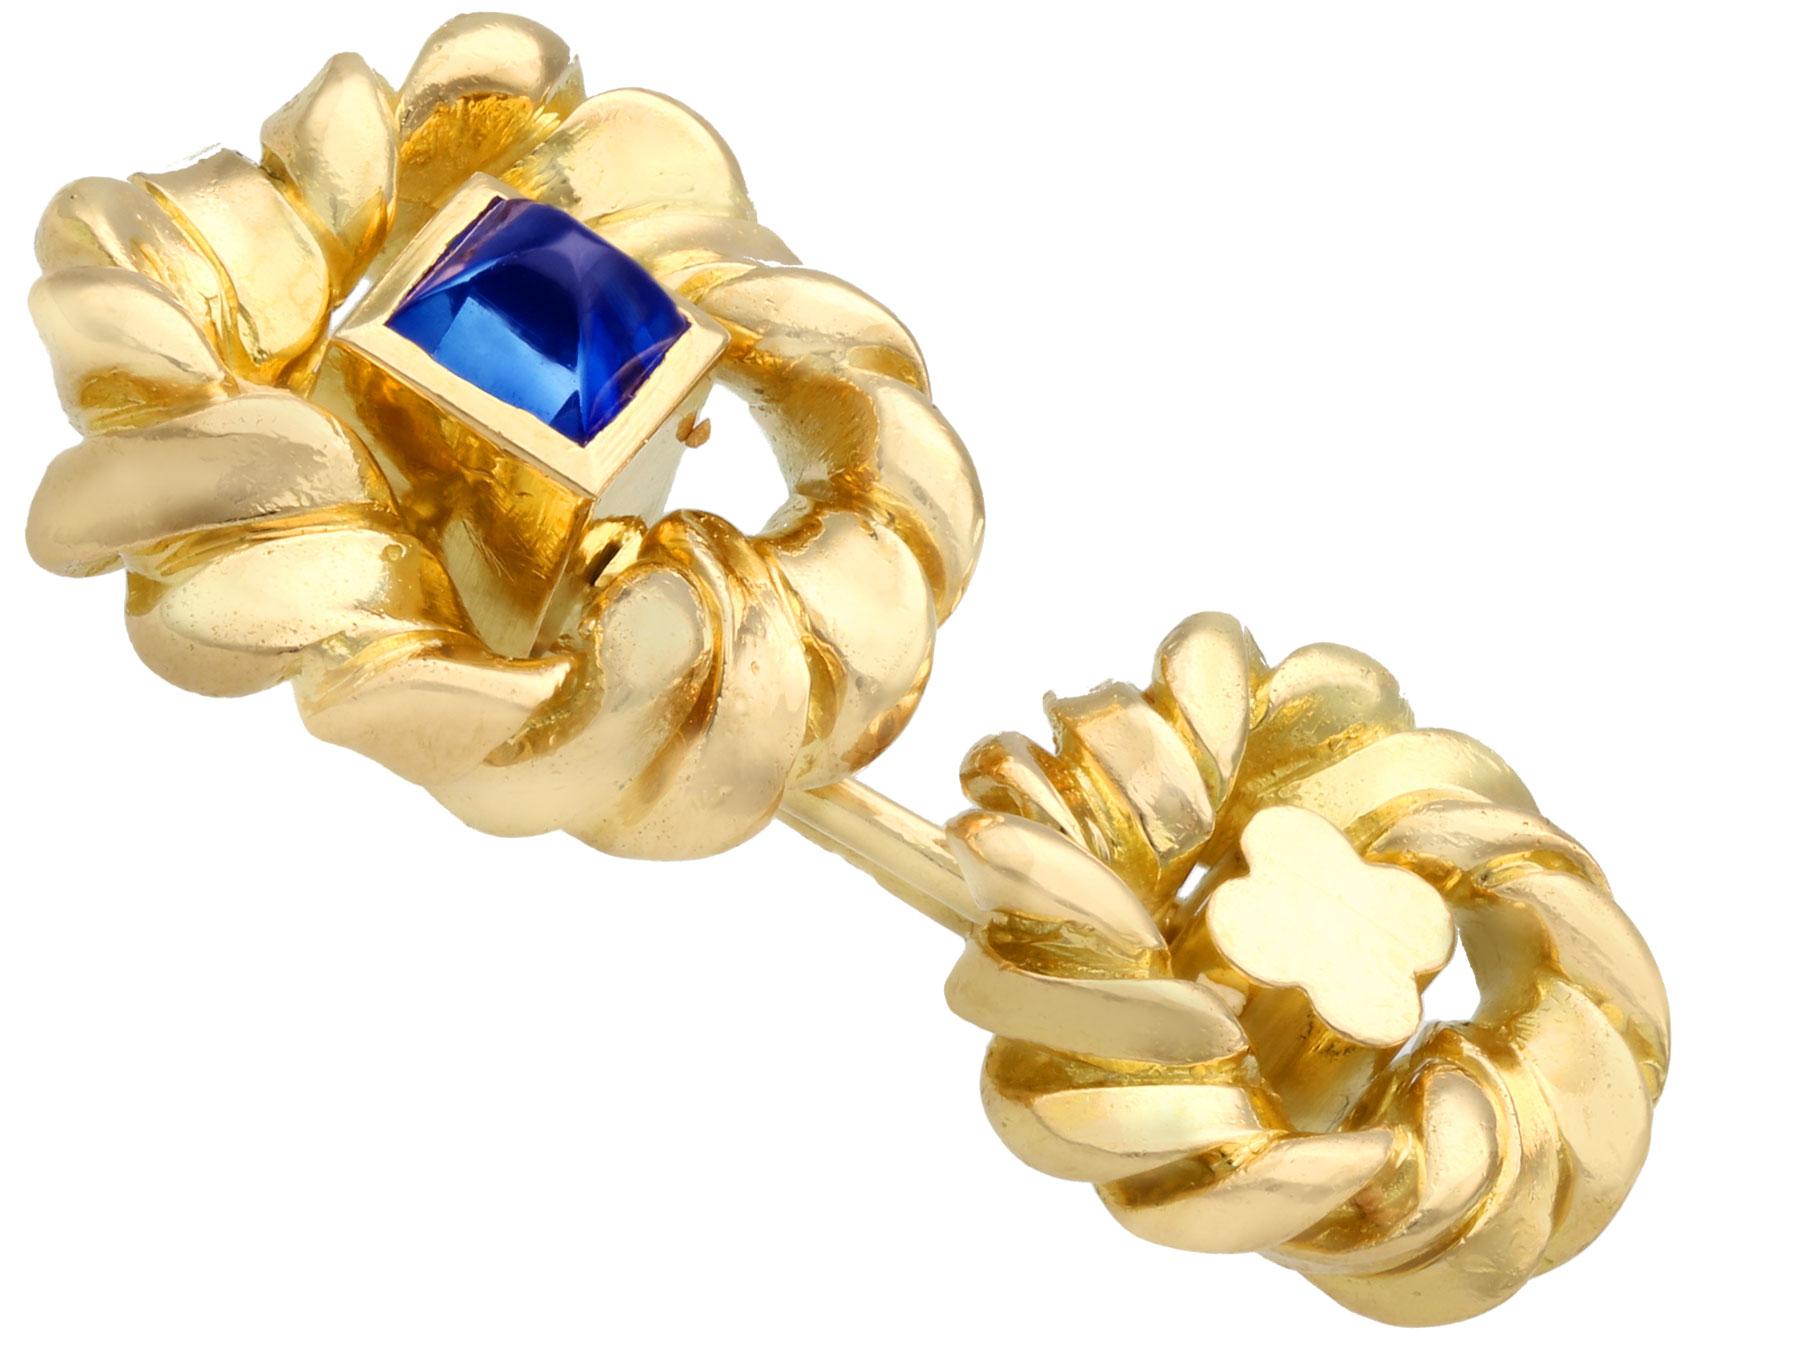 French 1960s Sapphire and Yellow Gold Cufflinks by Van Cleef & Arpels For Sale 1